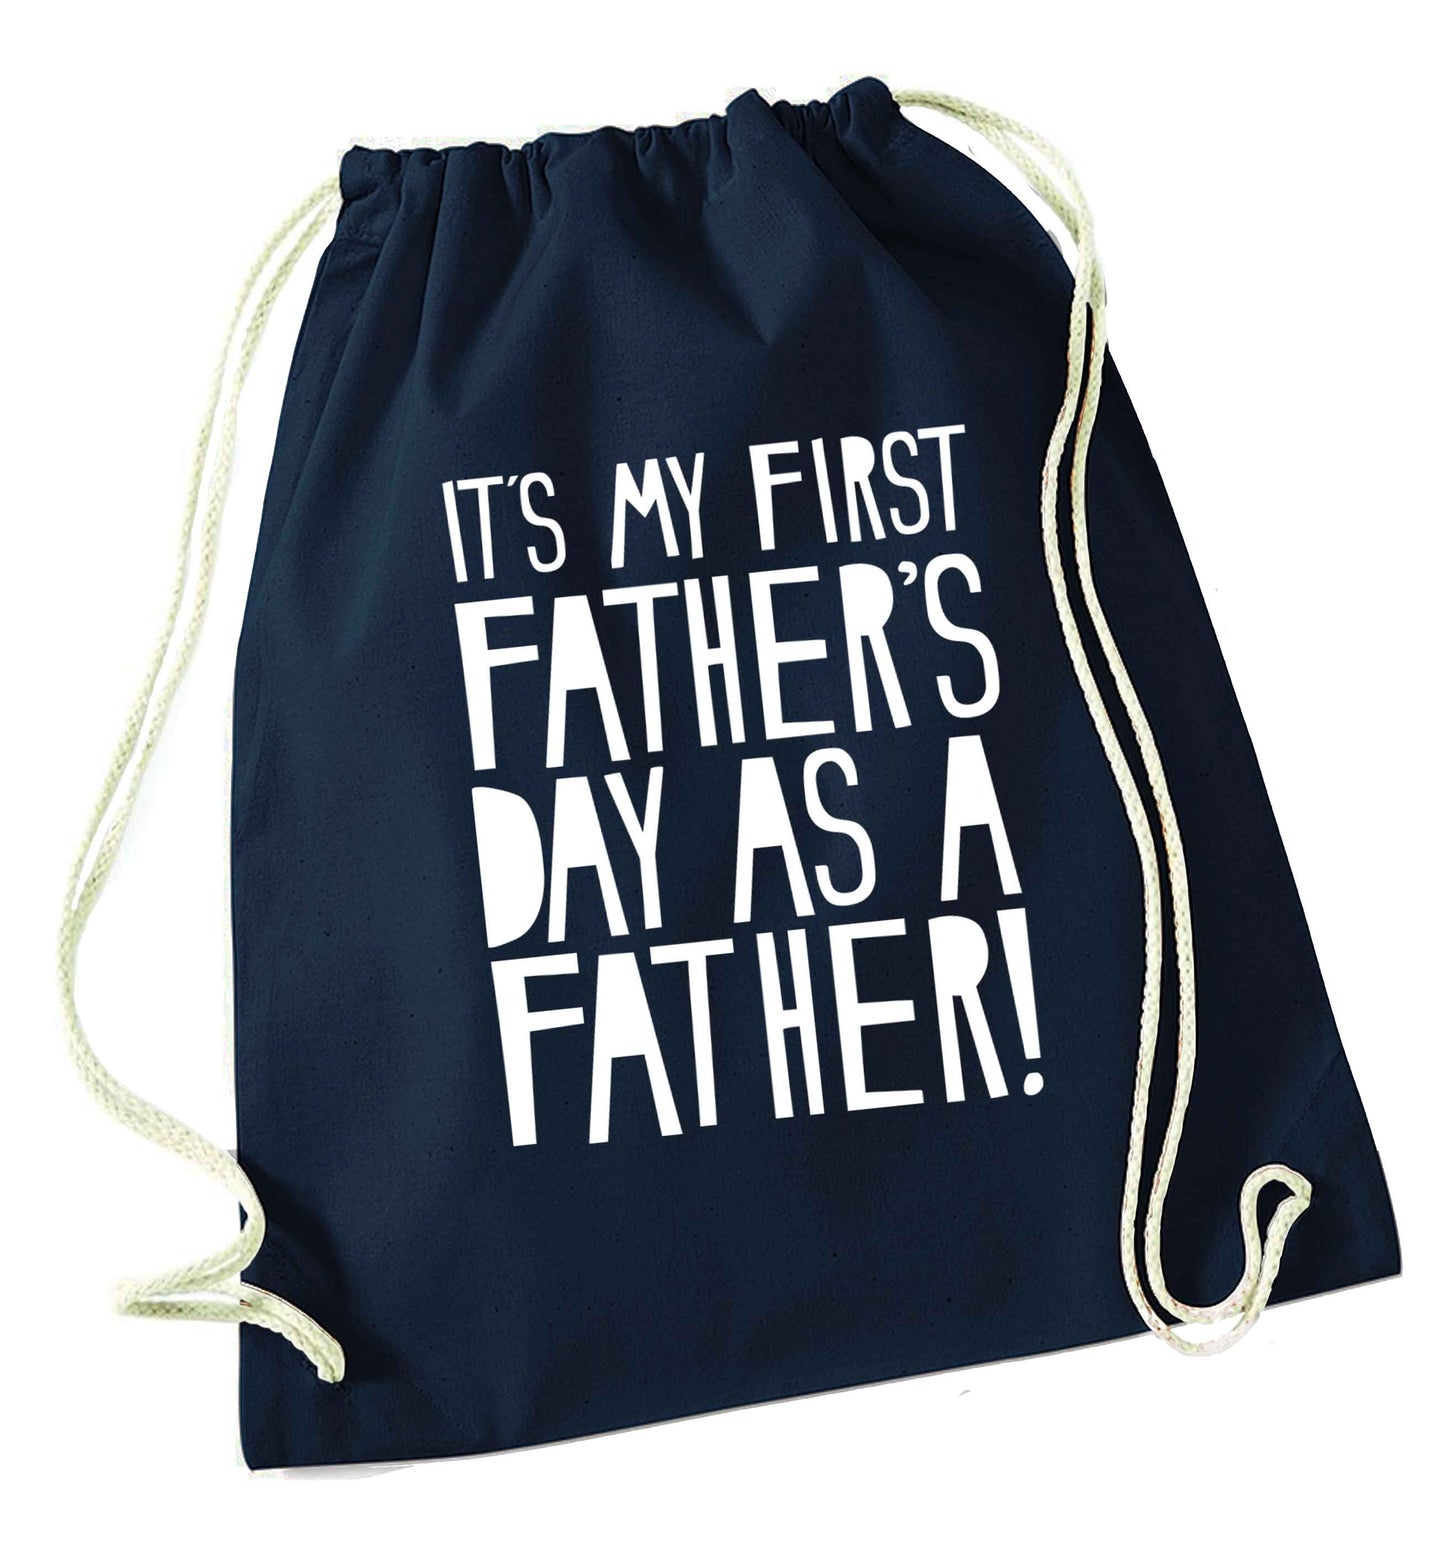 It's my first father's day as a father! navy drawstring bag